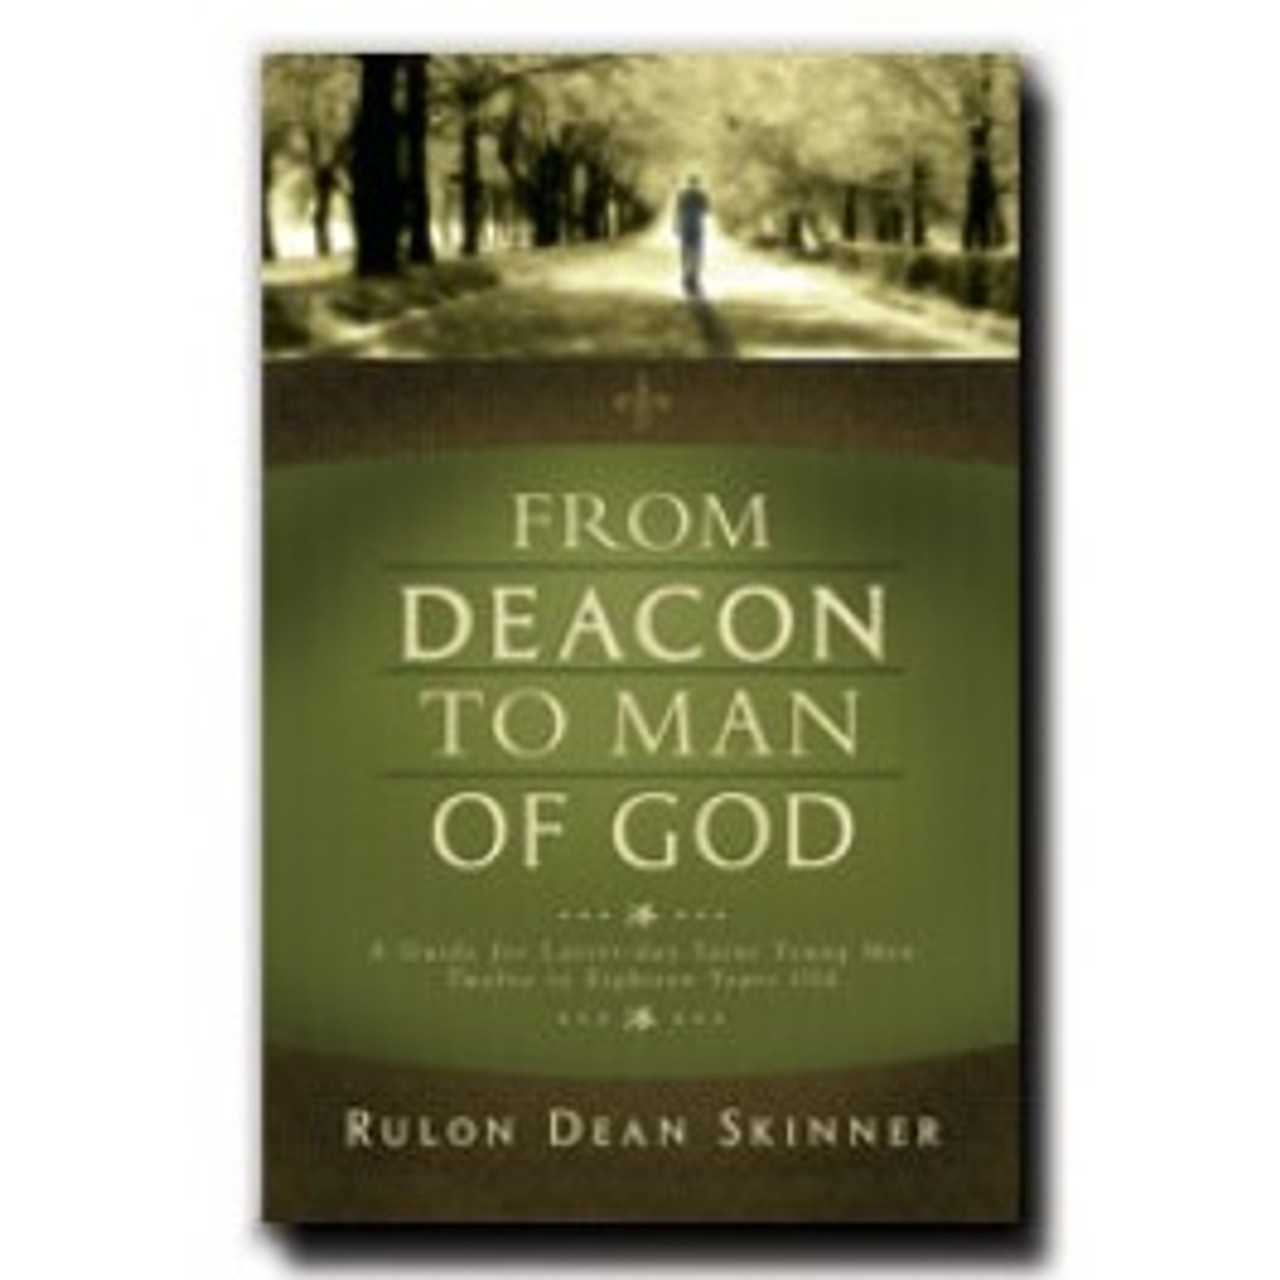 From Deacon to Man of God